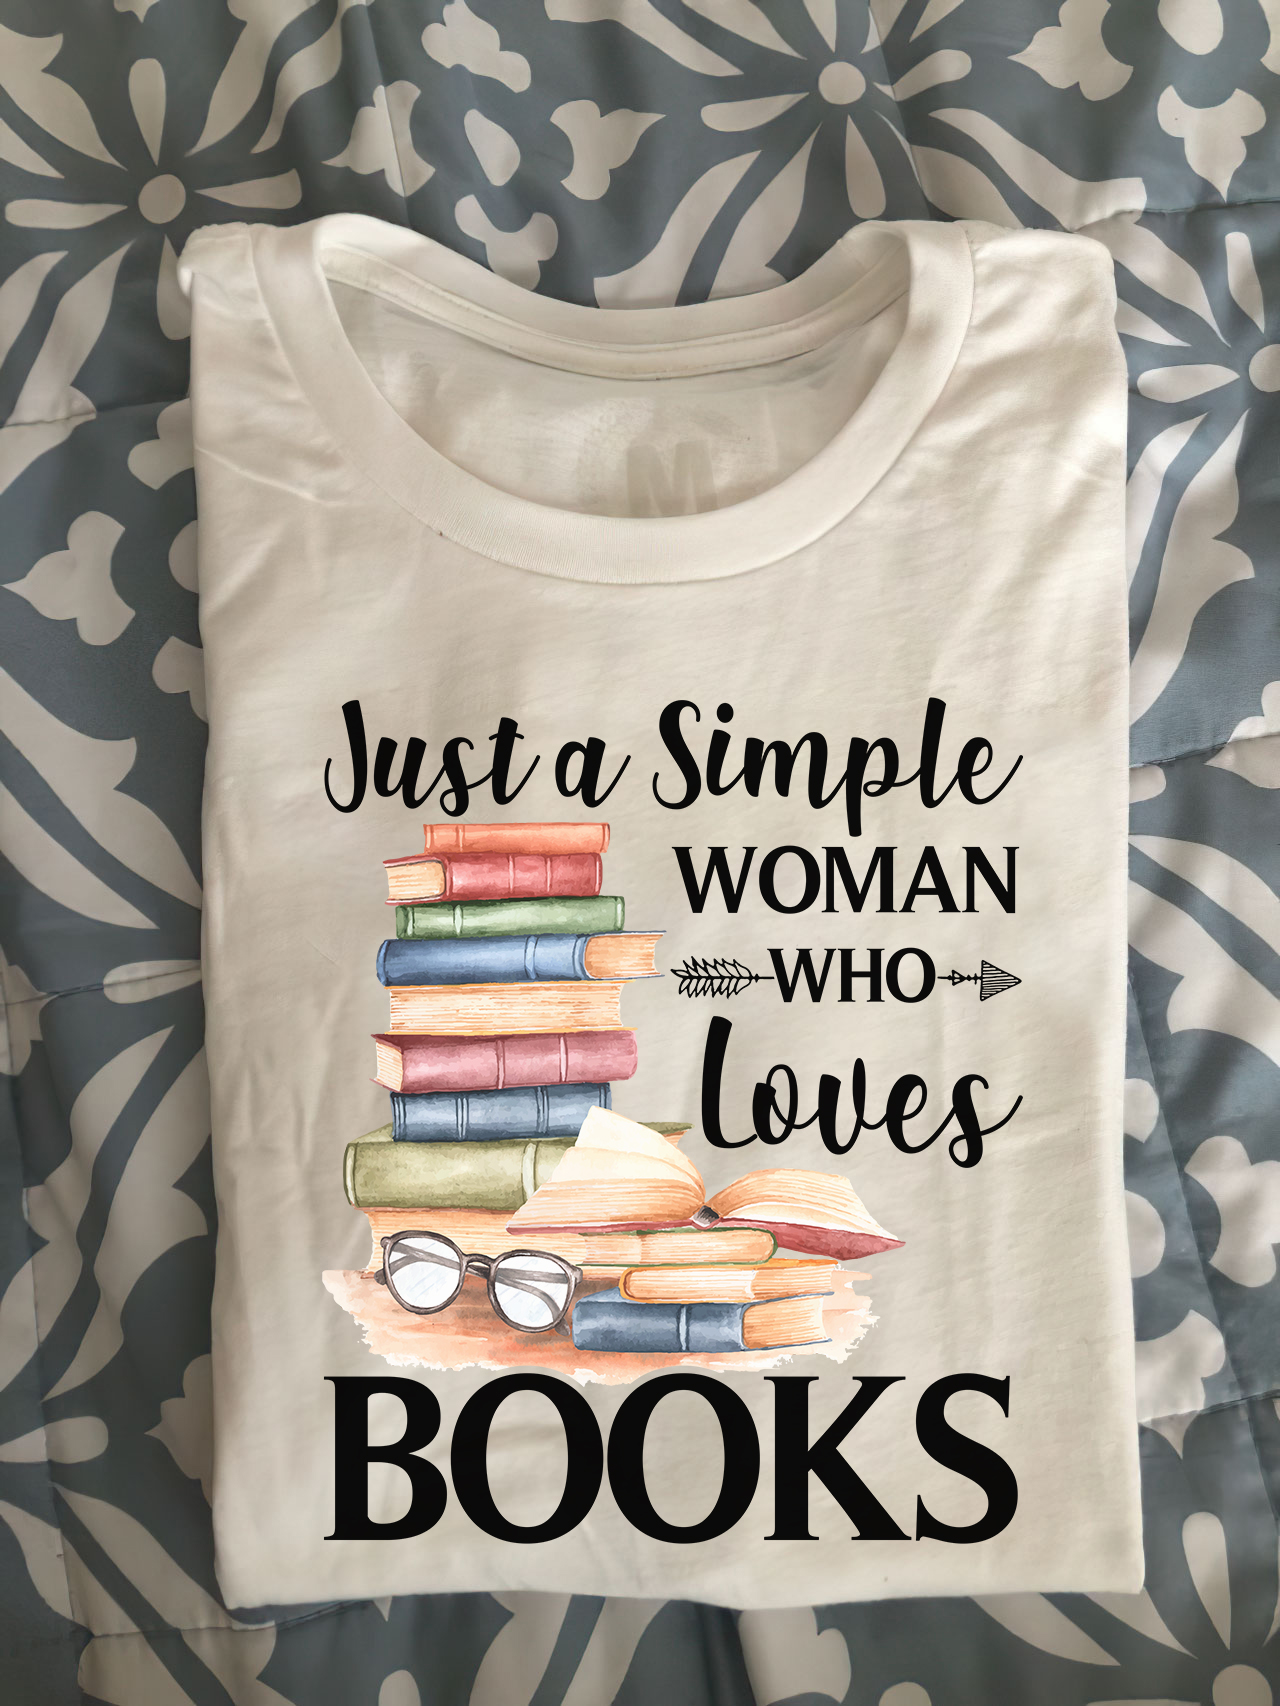 Just a simple woman who loves books - Book love